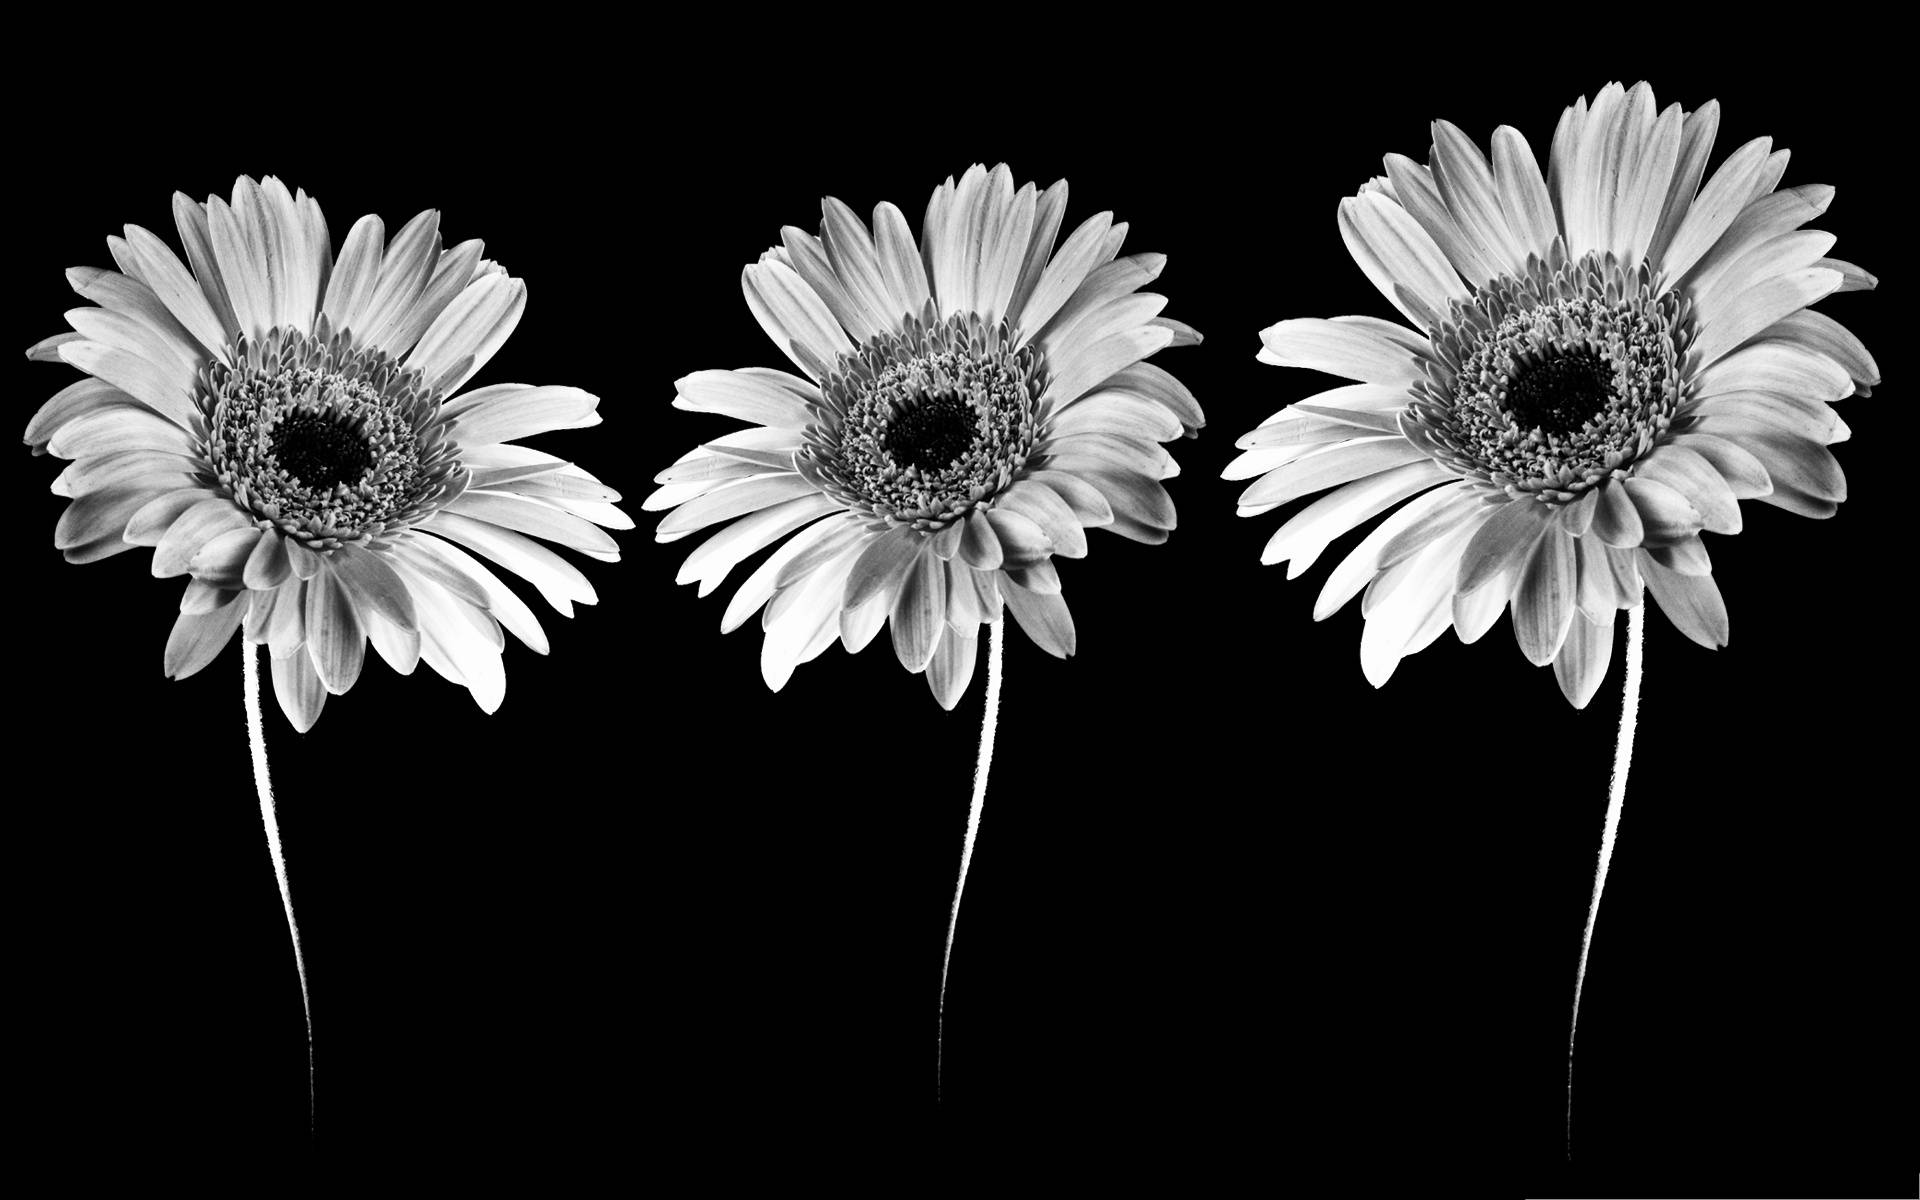 Three Daisies In Black And White On A Black Background Wallpaper